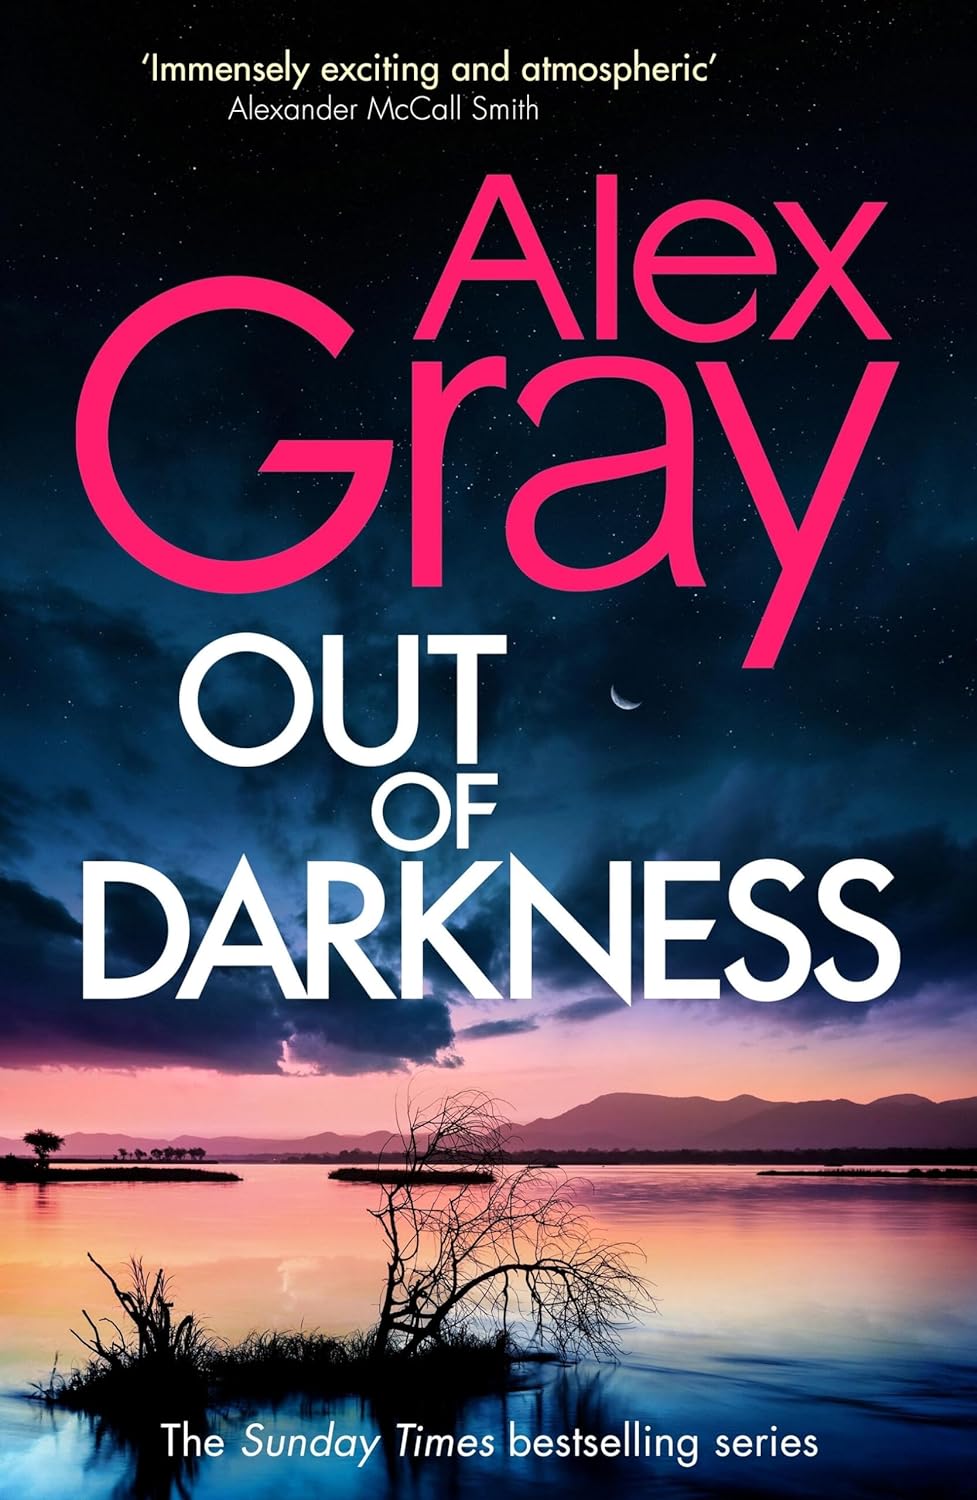 Alex_Gray_Out_of_Darkness_book_cover